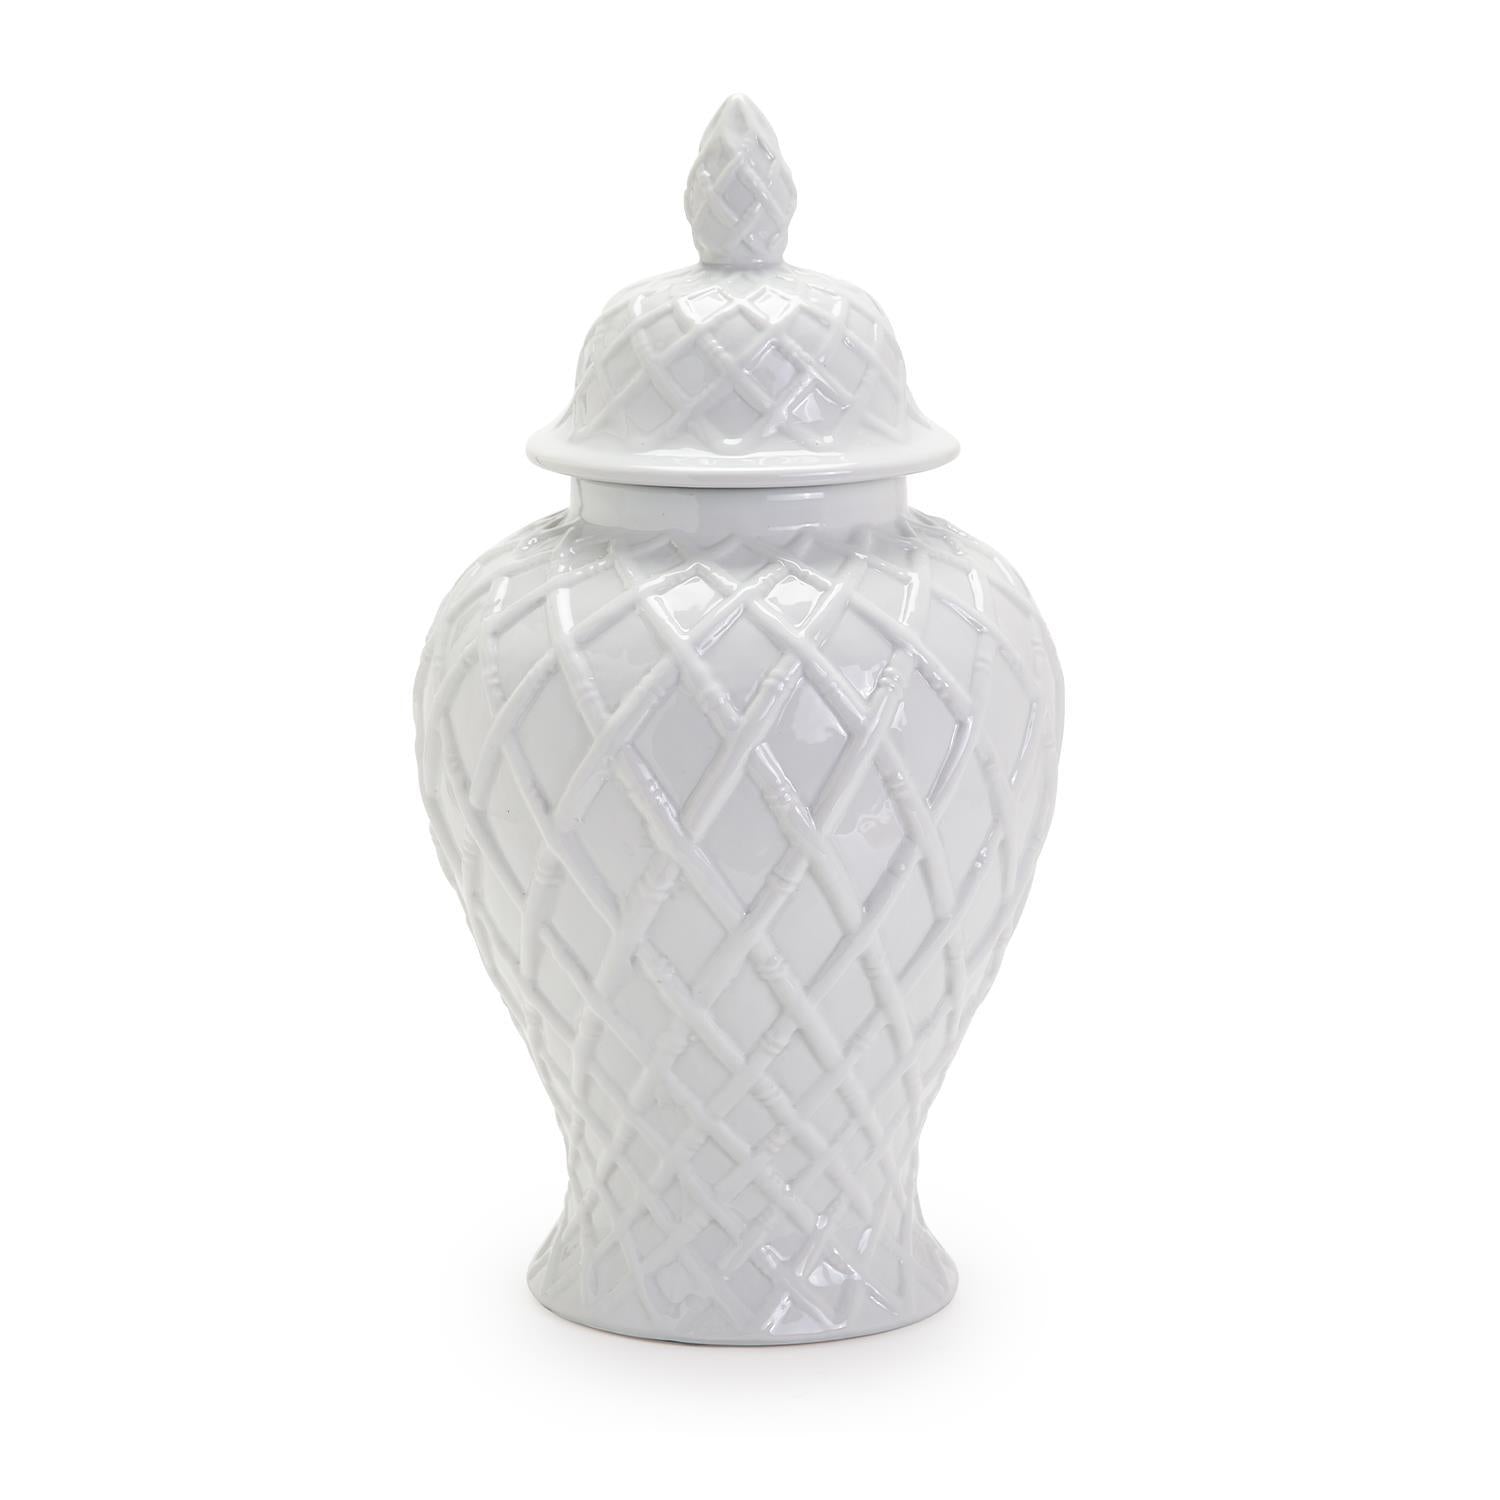 Bamboo Fretwork Ginger Jar - The Preppy Bunny